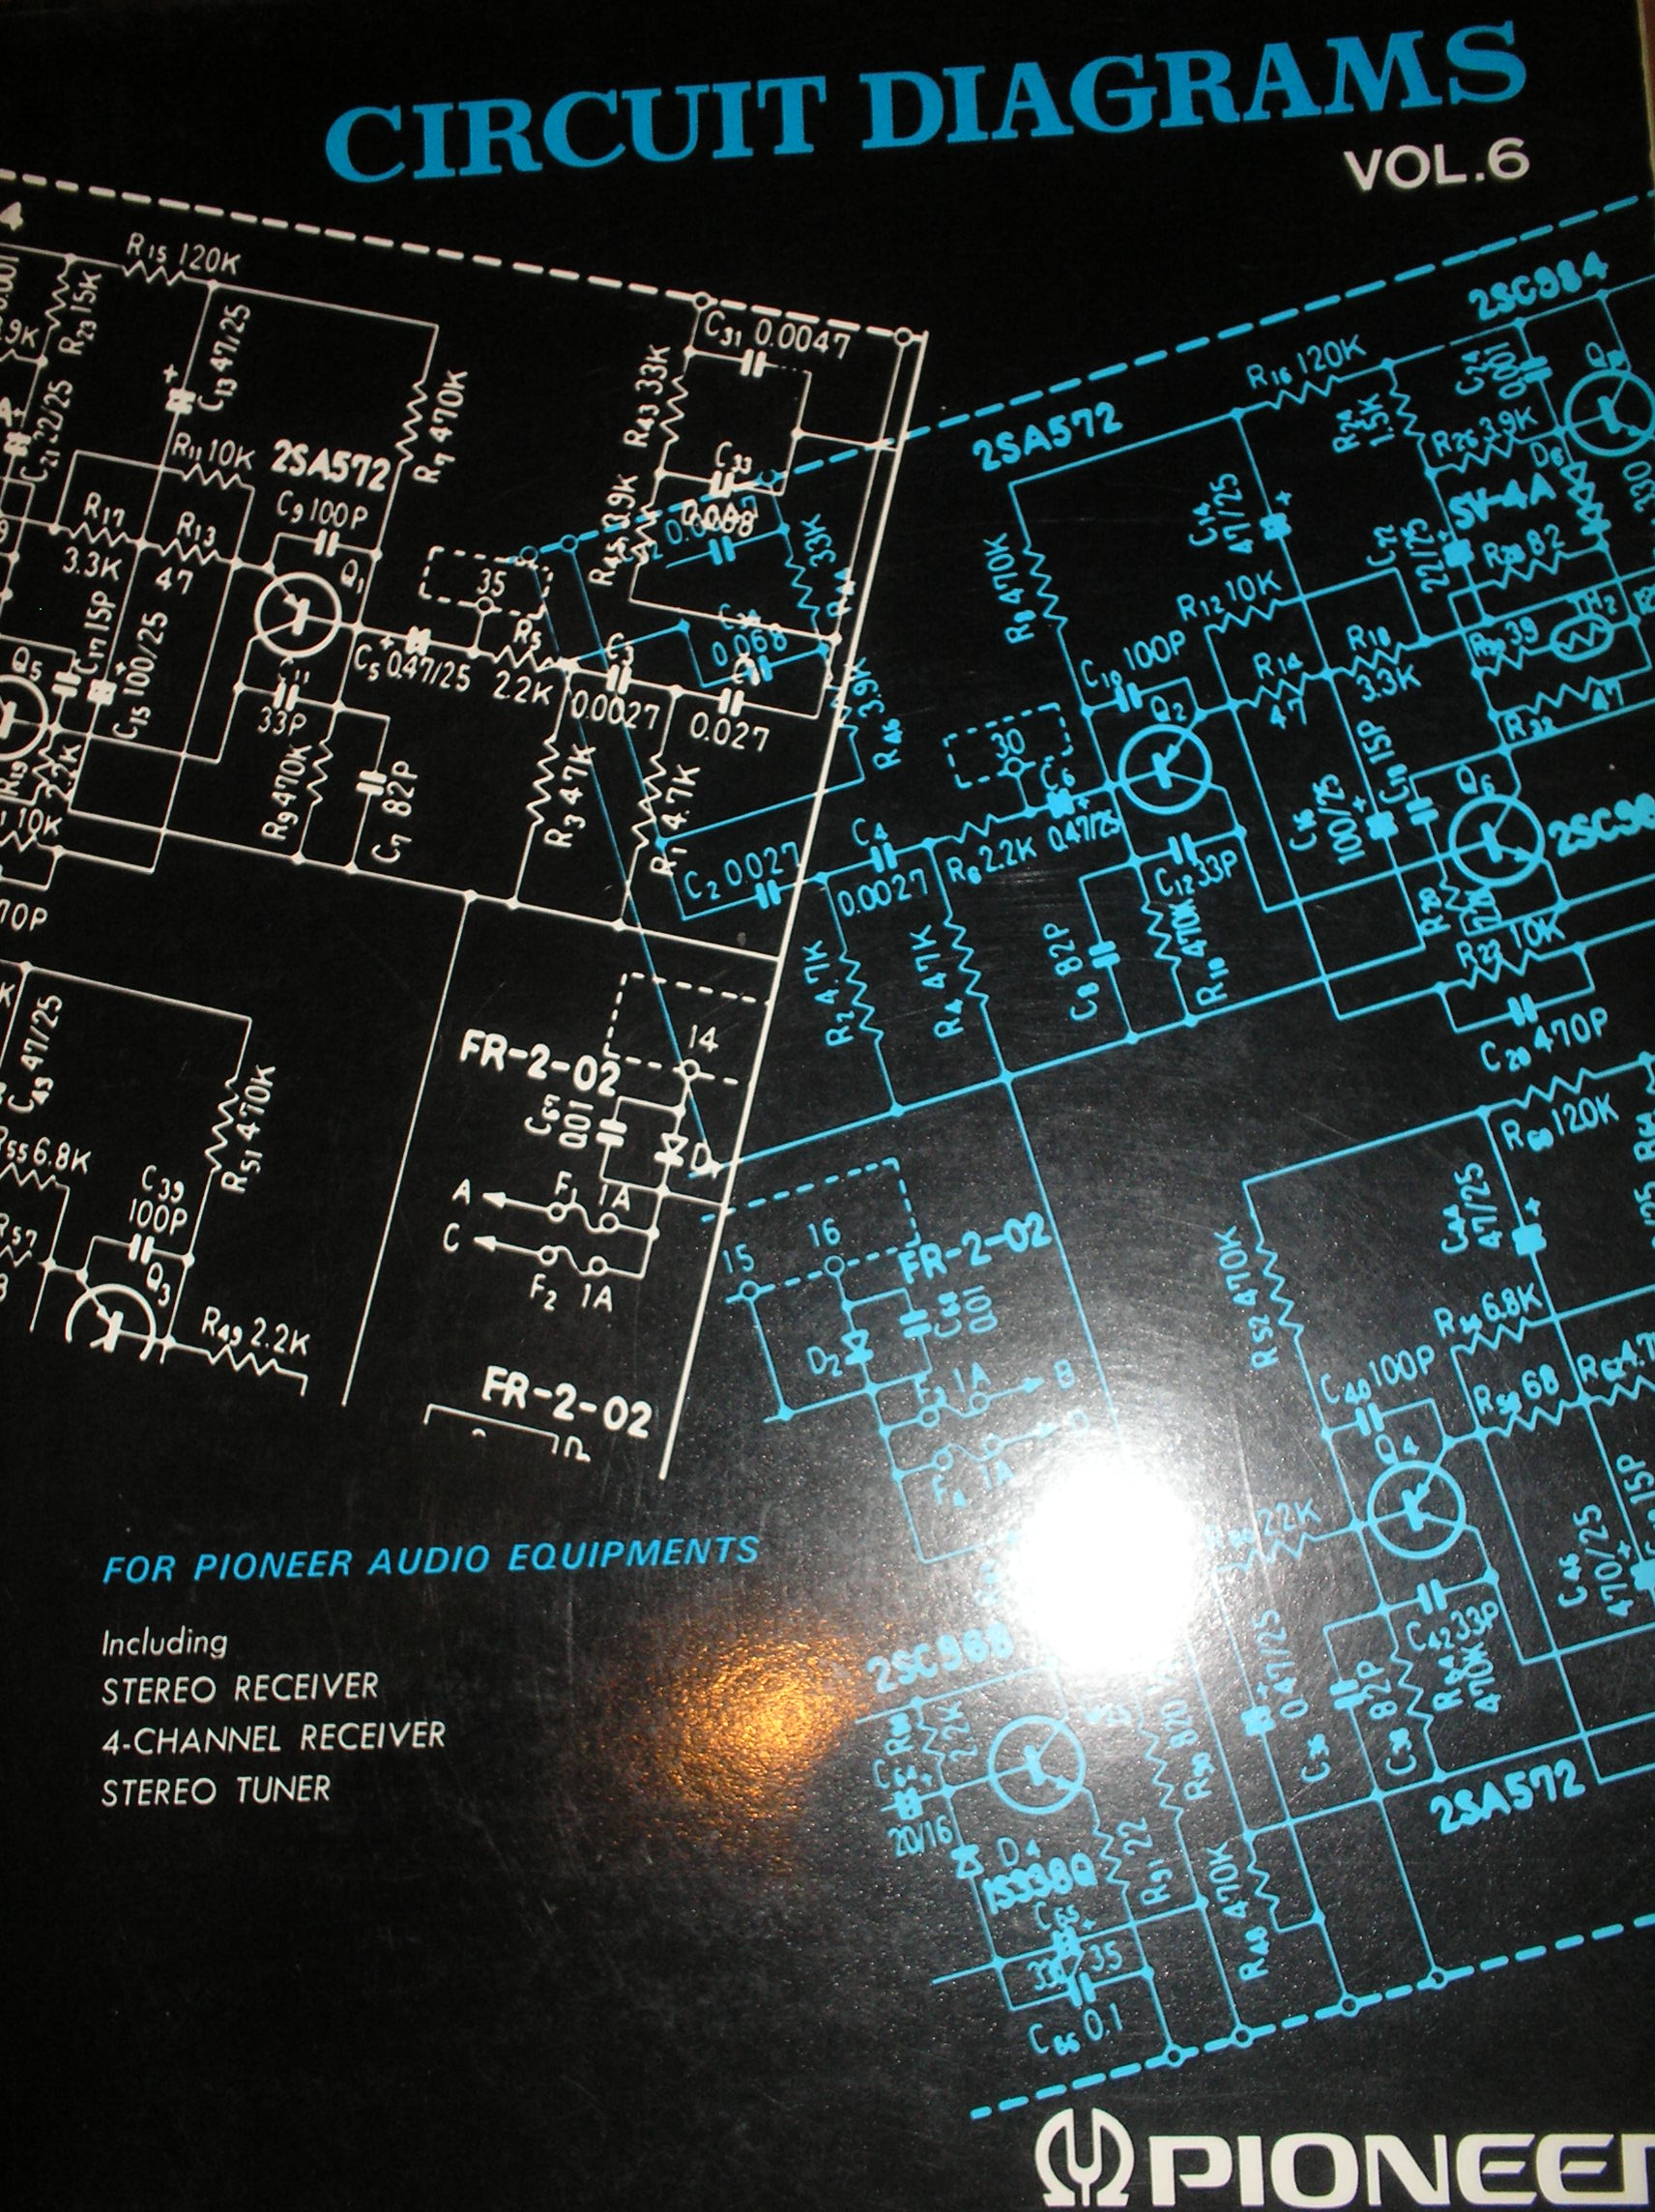 SX-535 Stereo Receiver fold out schematics.   Book 6